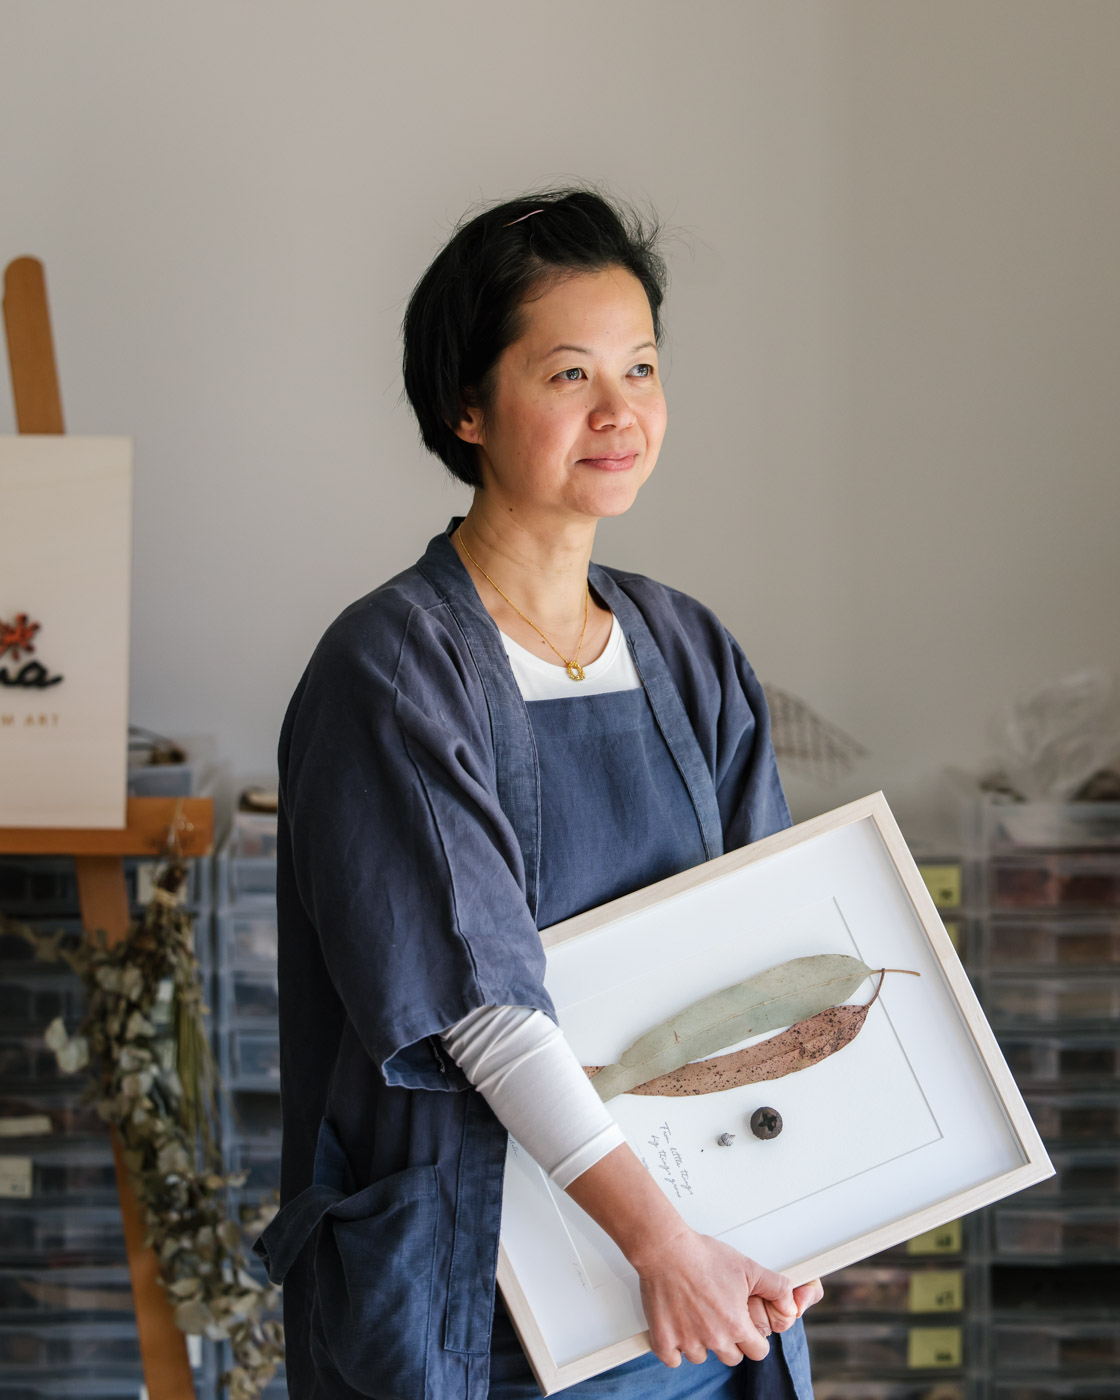 Sophie, an asian woman with short black hair, stands looking out the window holding a framed botanical artwork